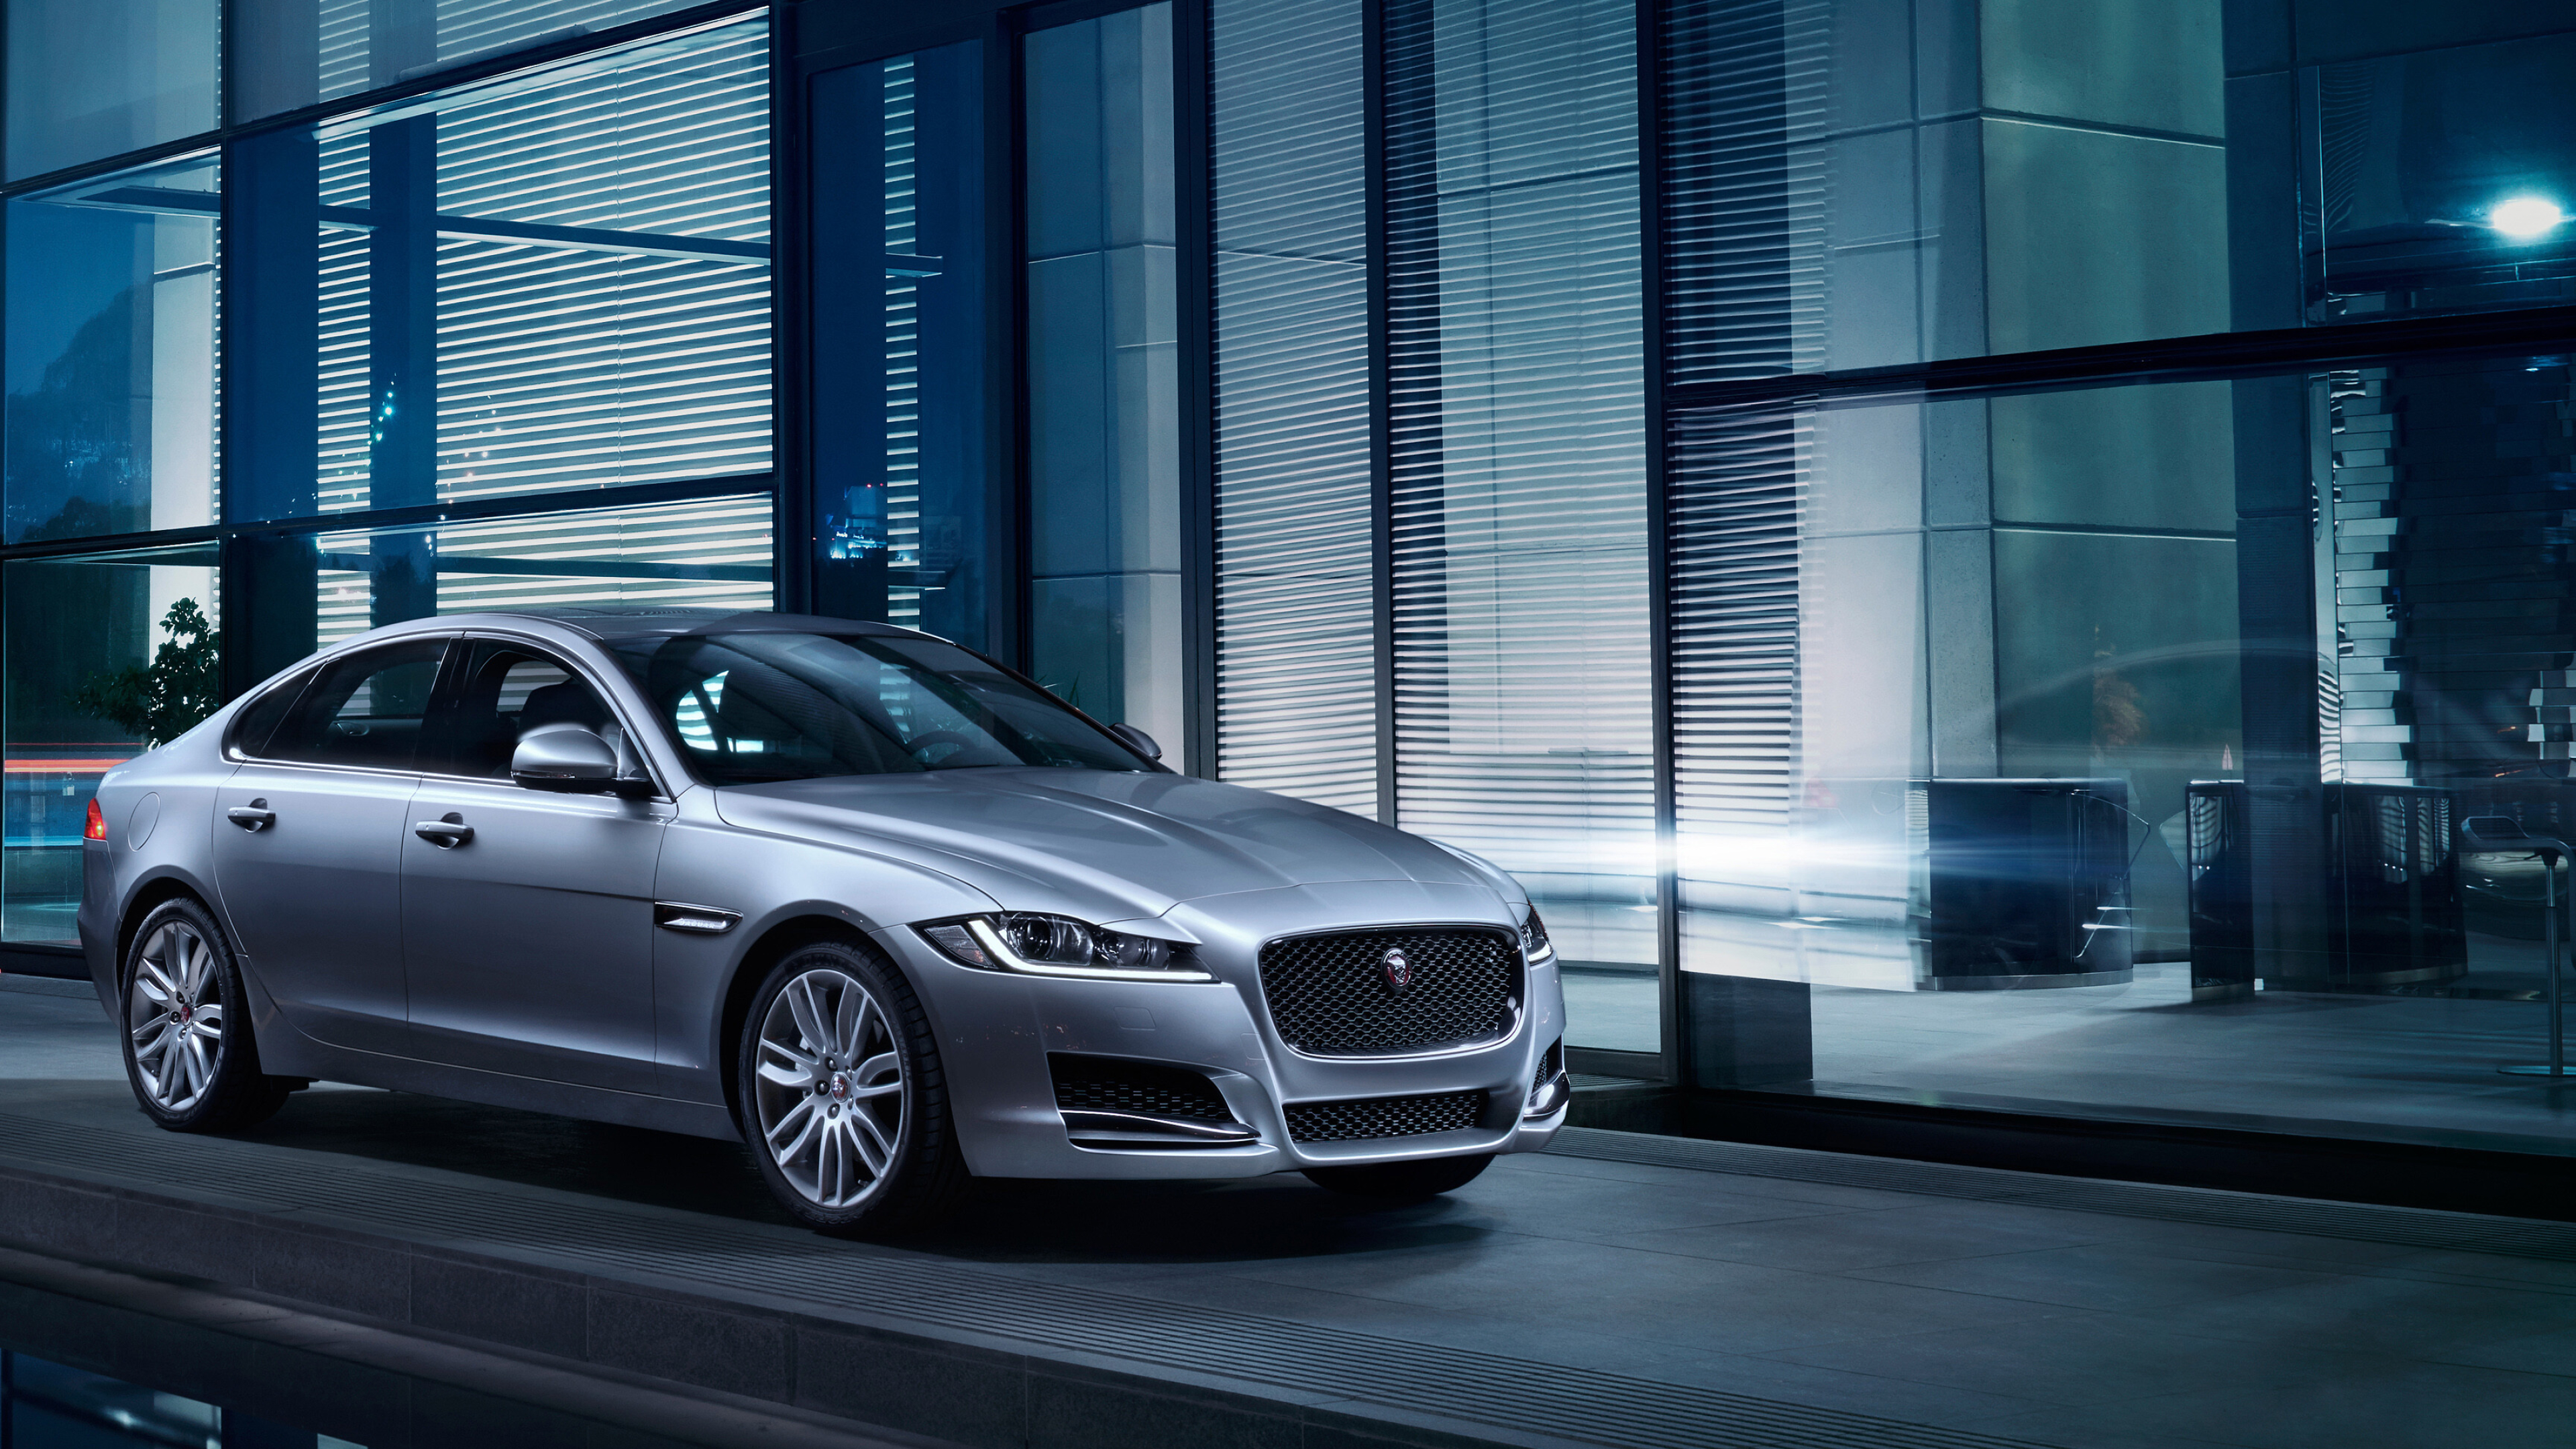 Jaguar Cars: A British luxury vehicle company owned by Tata Motors, XF cars. 3840x2160 4K Background.